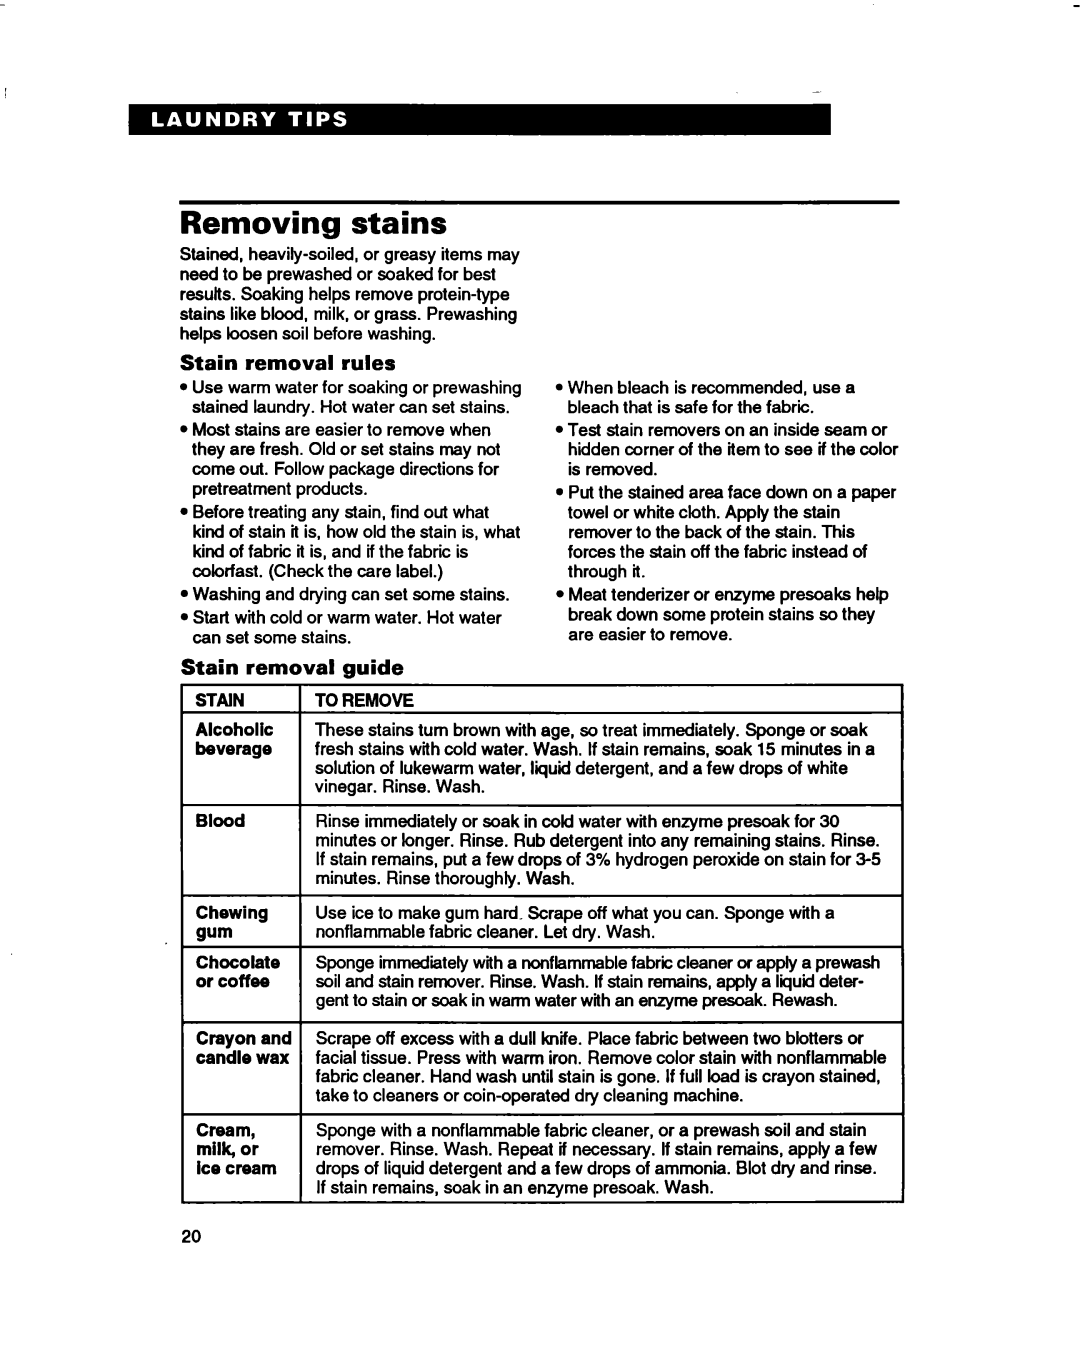 Whirlpool 3396314 warranty Removing stains, Stain removal rules, Stain removal guide, STAlN, Chewing 